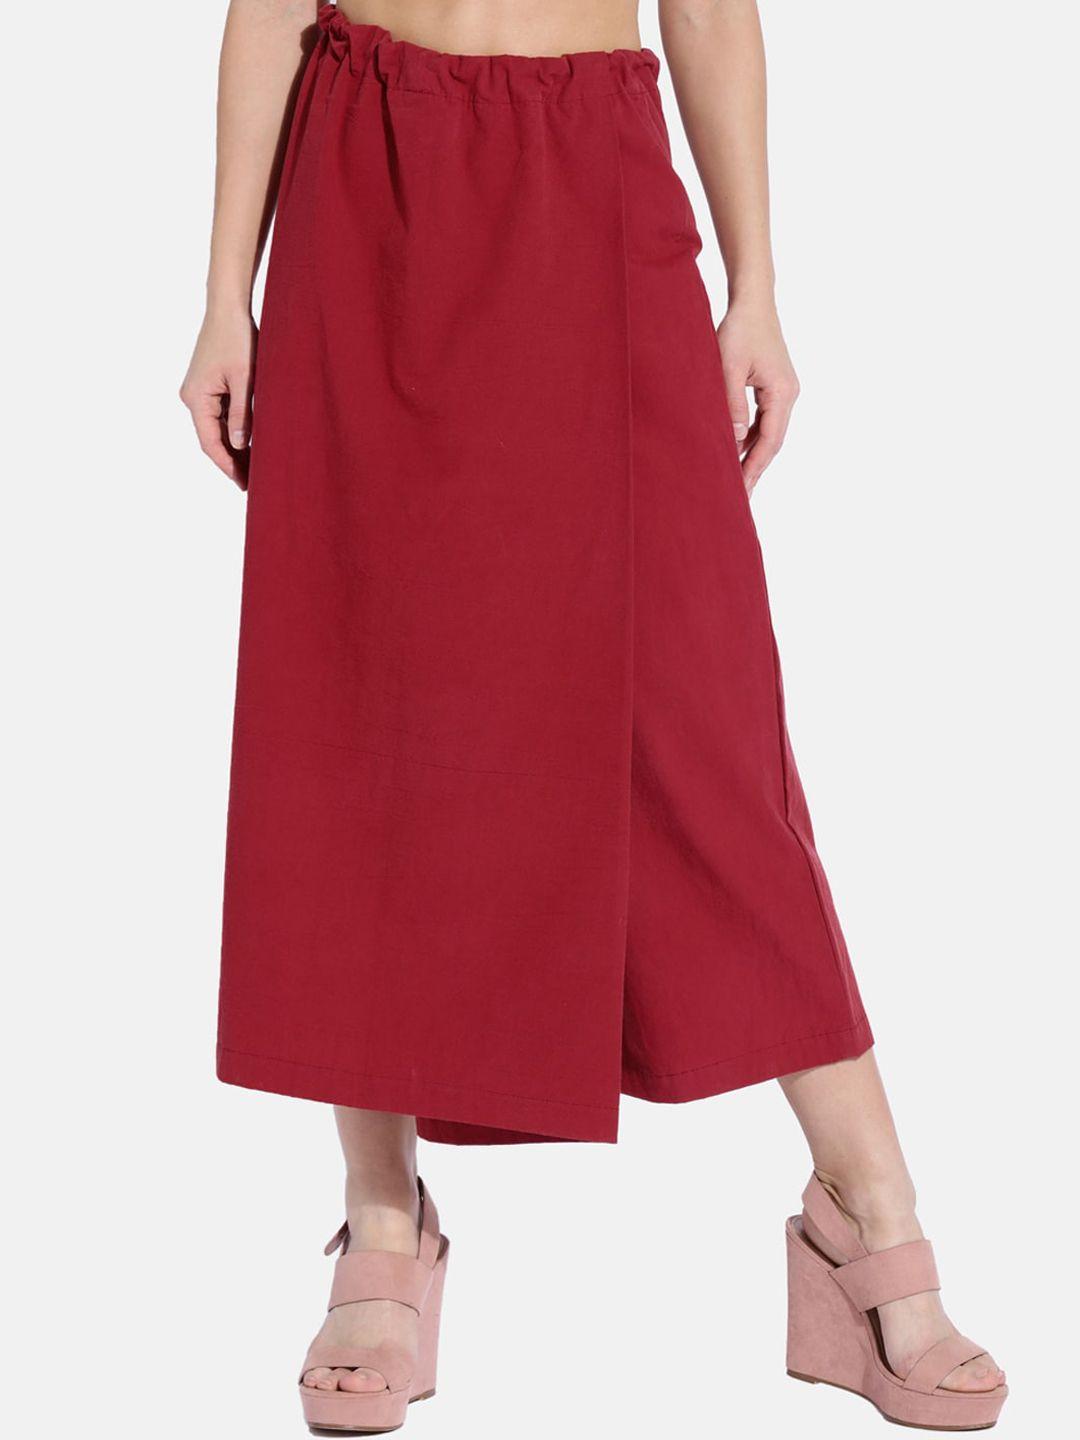 grass by gitika goyal women maroon loose fit culottes trousers